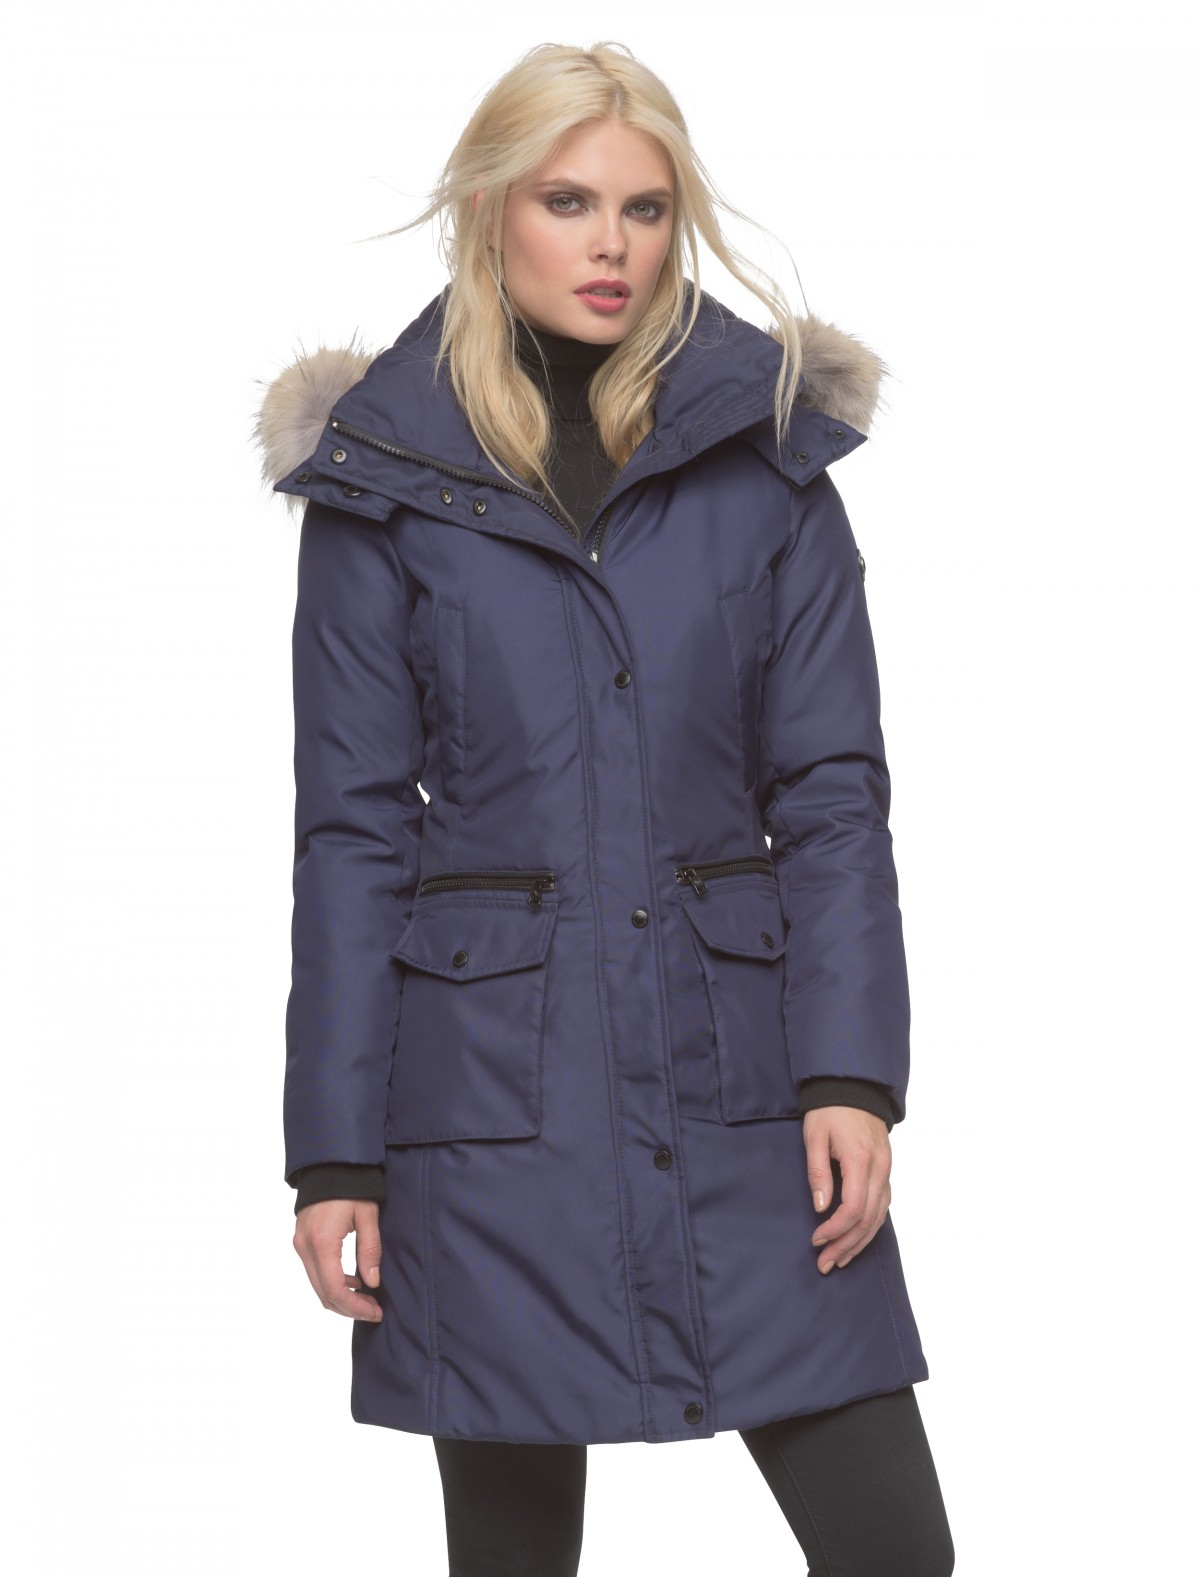 Lyst - Andrew Marc Jamie Quilted Down Jacket in Blue